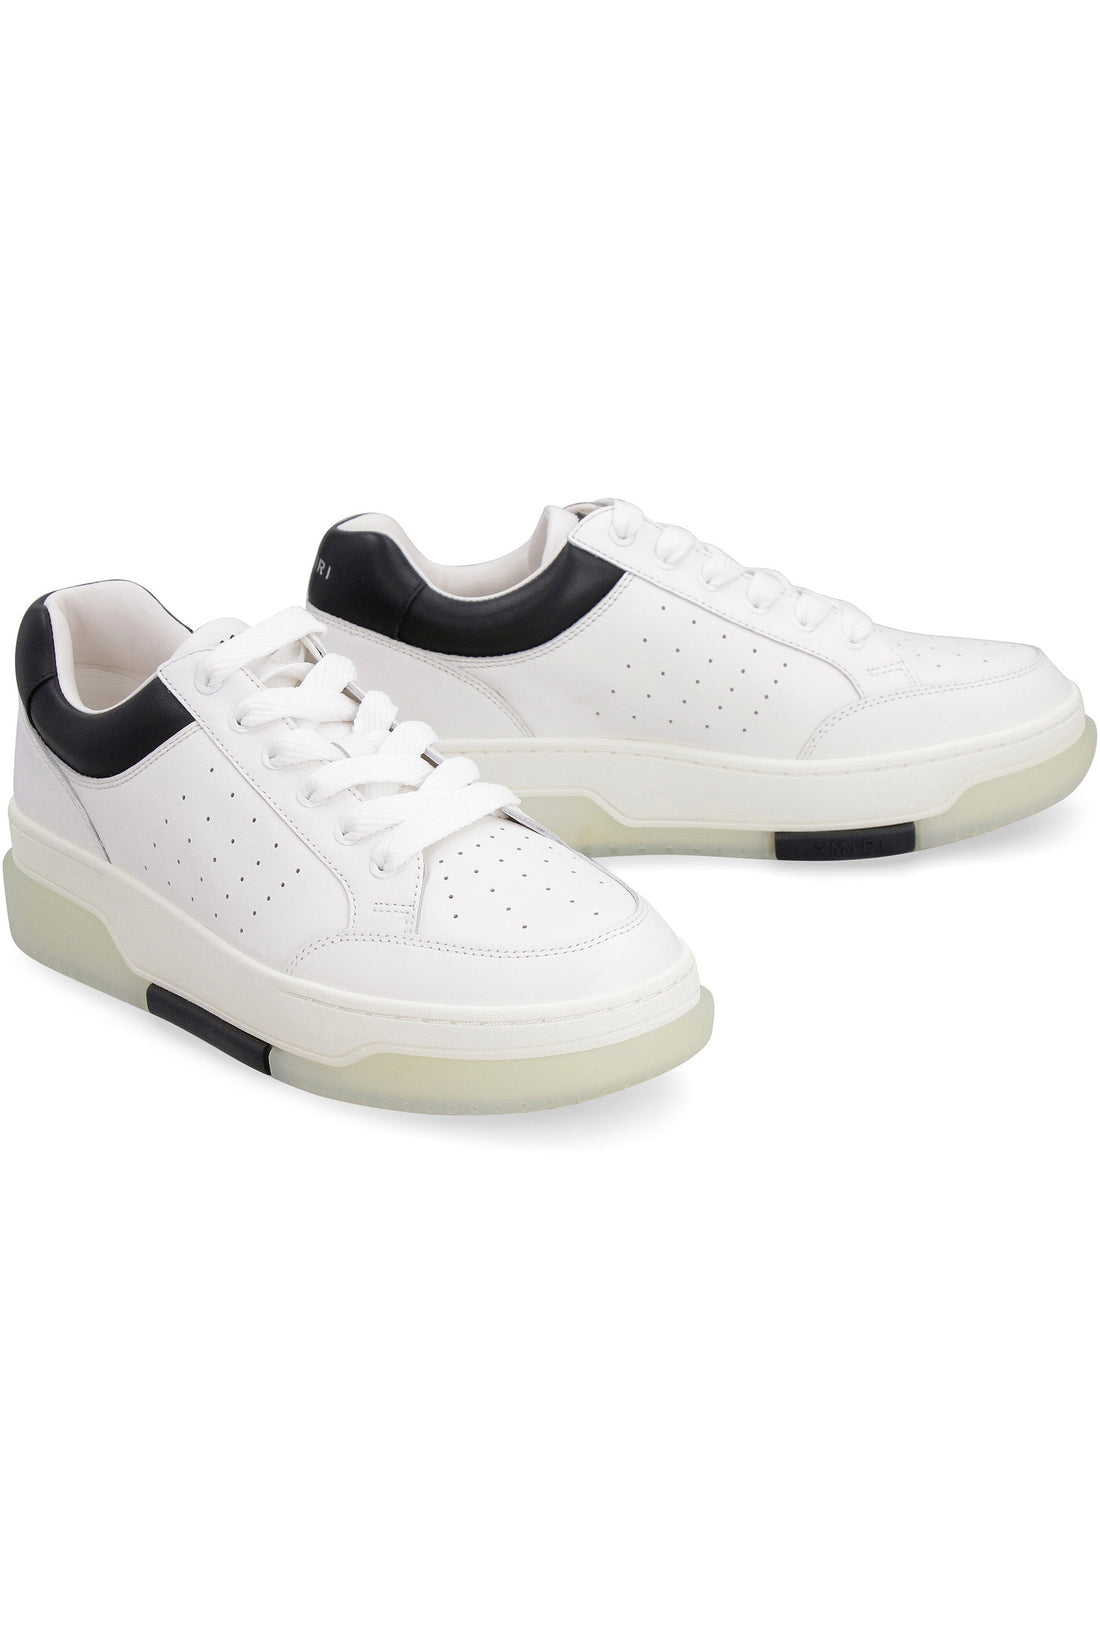 AMIRI-OUTLET-SALE-Stadium leather low-top sneakers-ARCHIVIST